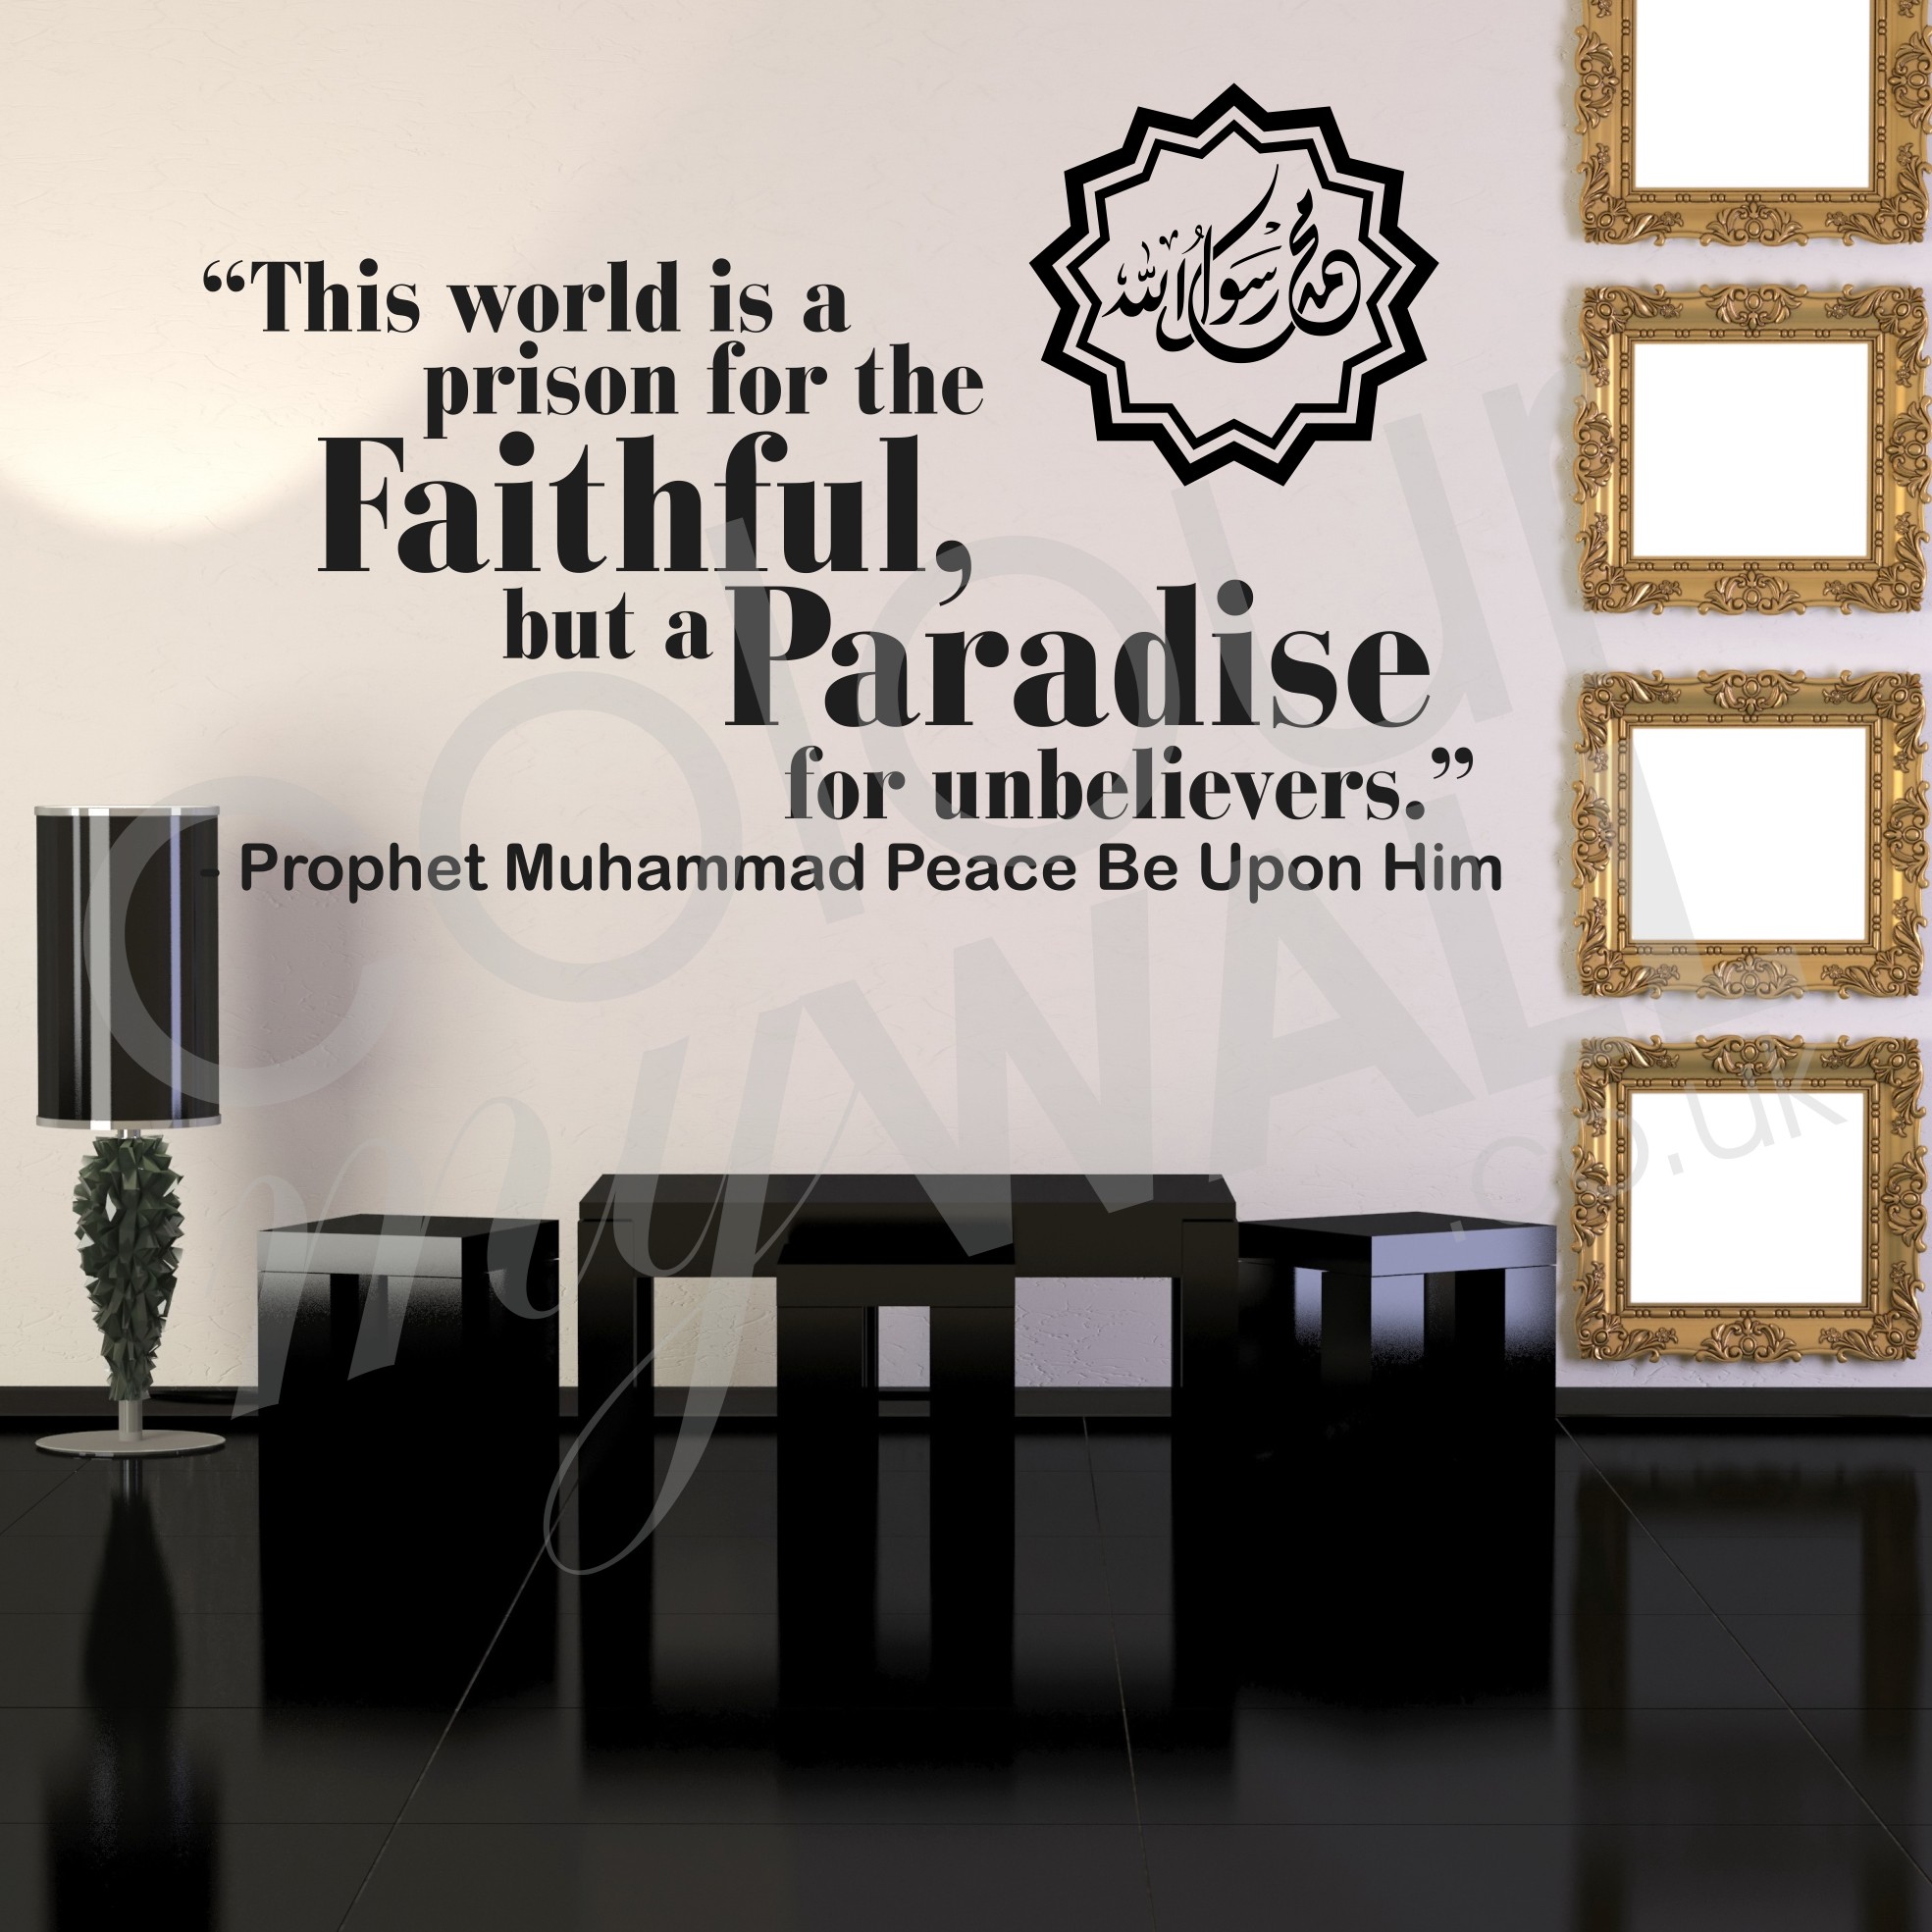 This World Is A Prison For The Faithful ,This world is a prison for the faithful but a paradise for unbelievers. - Prophet Muhammad (P.B.U.H), faithful ,paradise,unbelievers,saying of prophet (P.B.U.H),saying,world,prison,Muhammad (P.B.U.H)